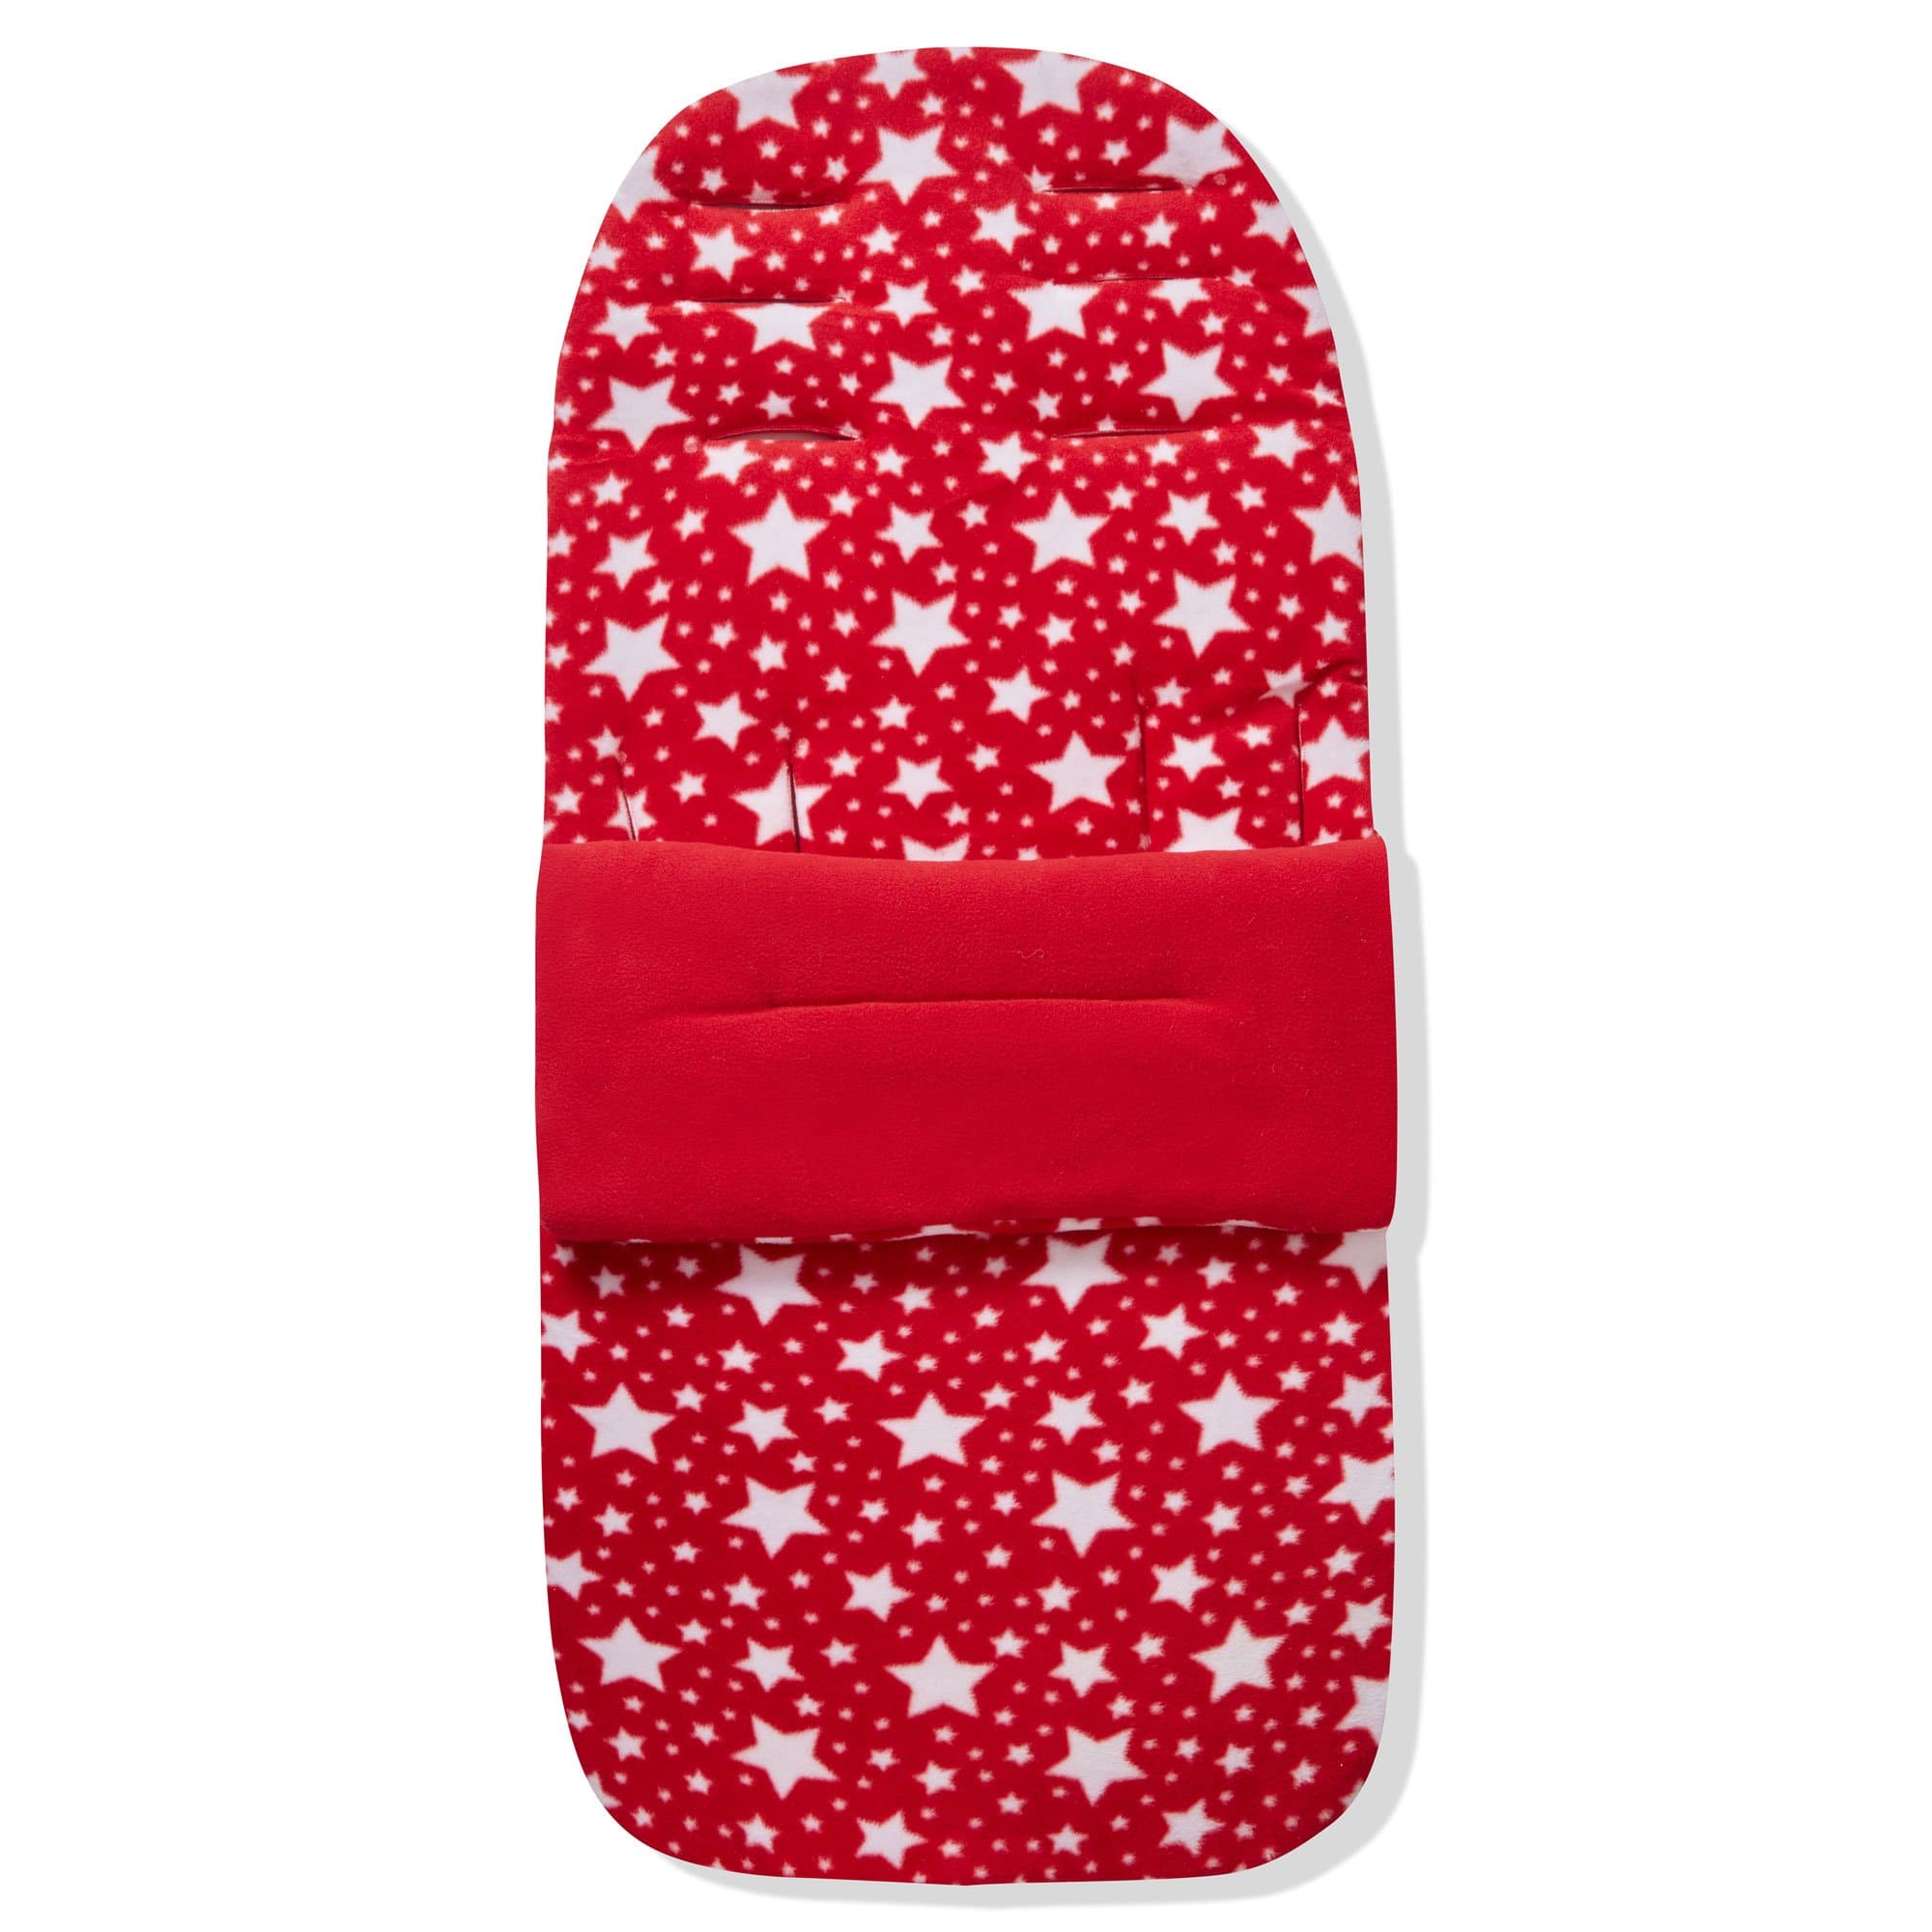 Fleece Footmuff / Cosy Toes Compatible With Combi - For Your Little One